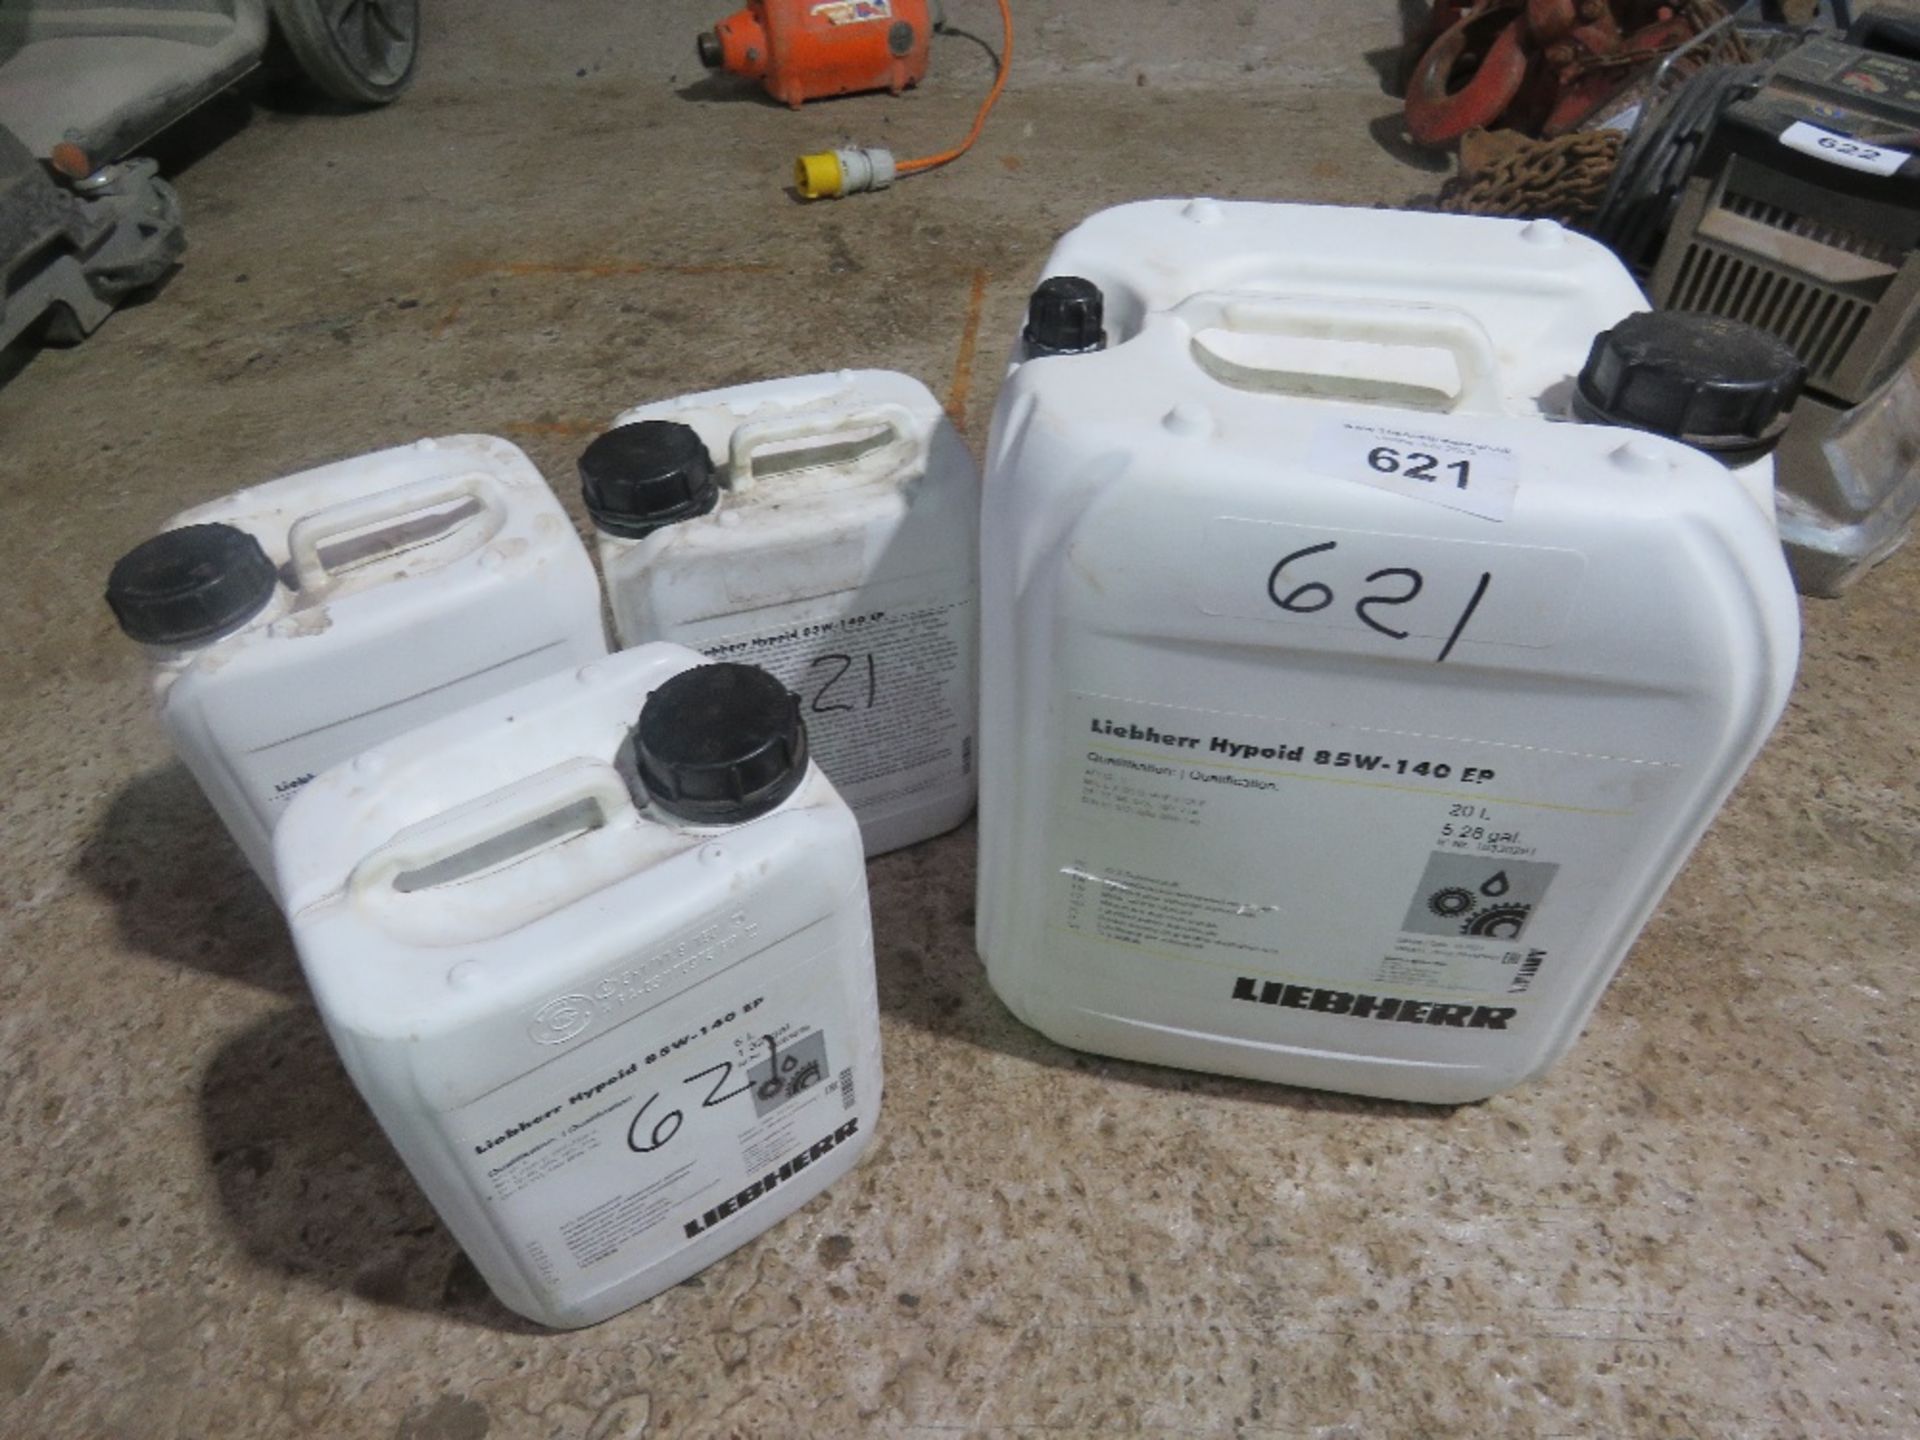 4 X LIEBHERR OIL CANS: HYPOID 85W140 AND A PART CAN OF ENGINE OIL. THIS LOT IS SOLD UNDER THE AUC